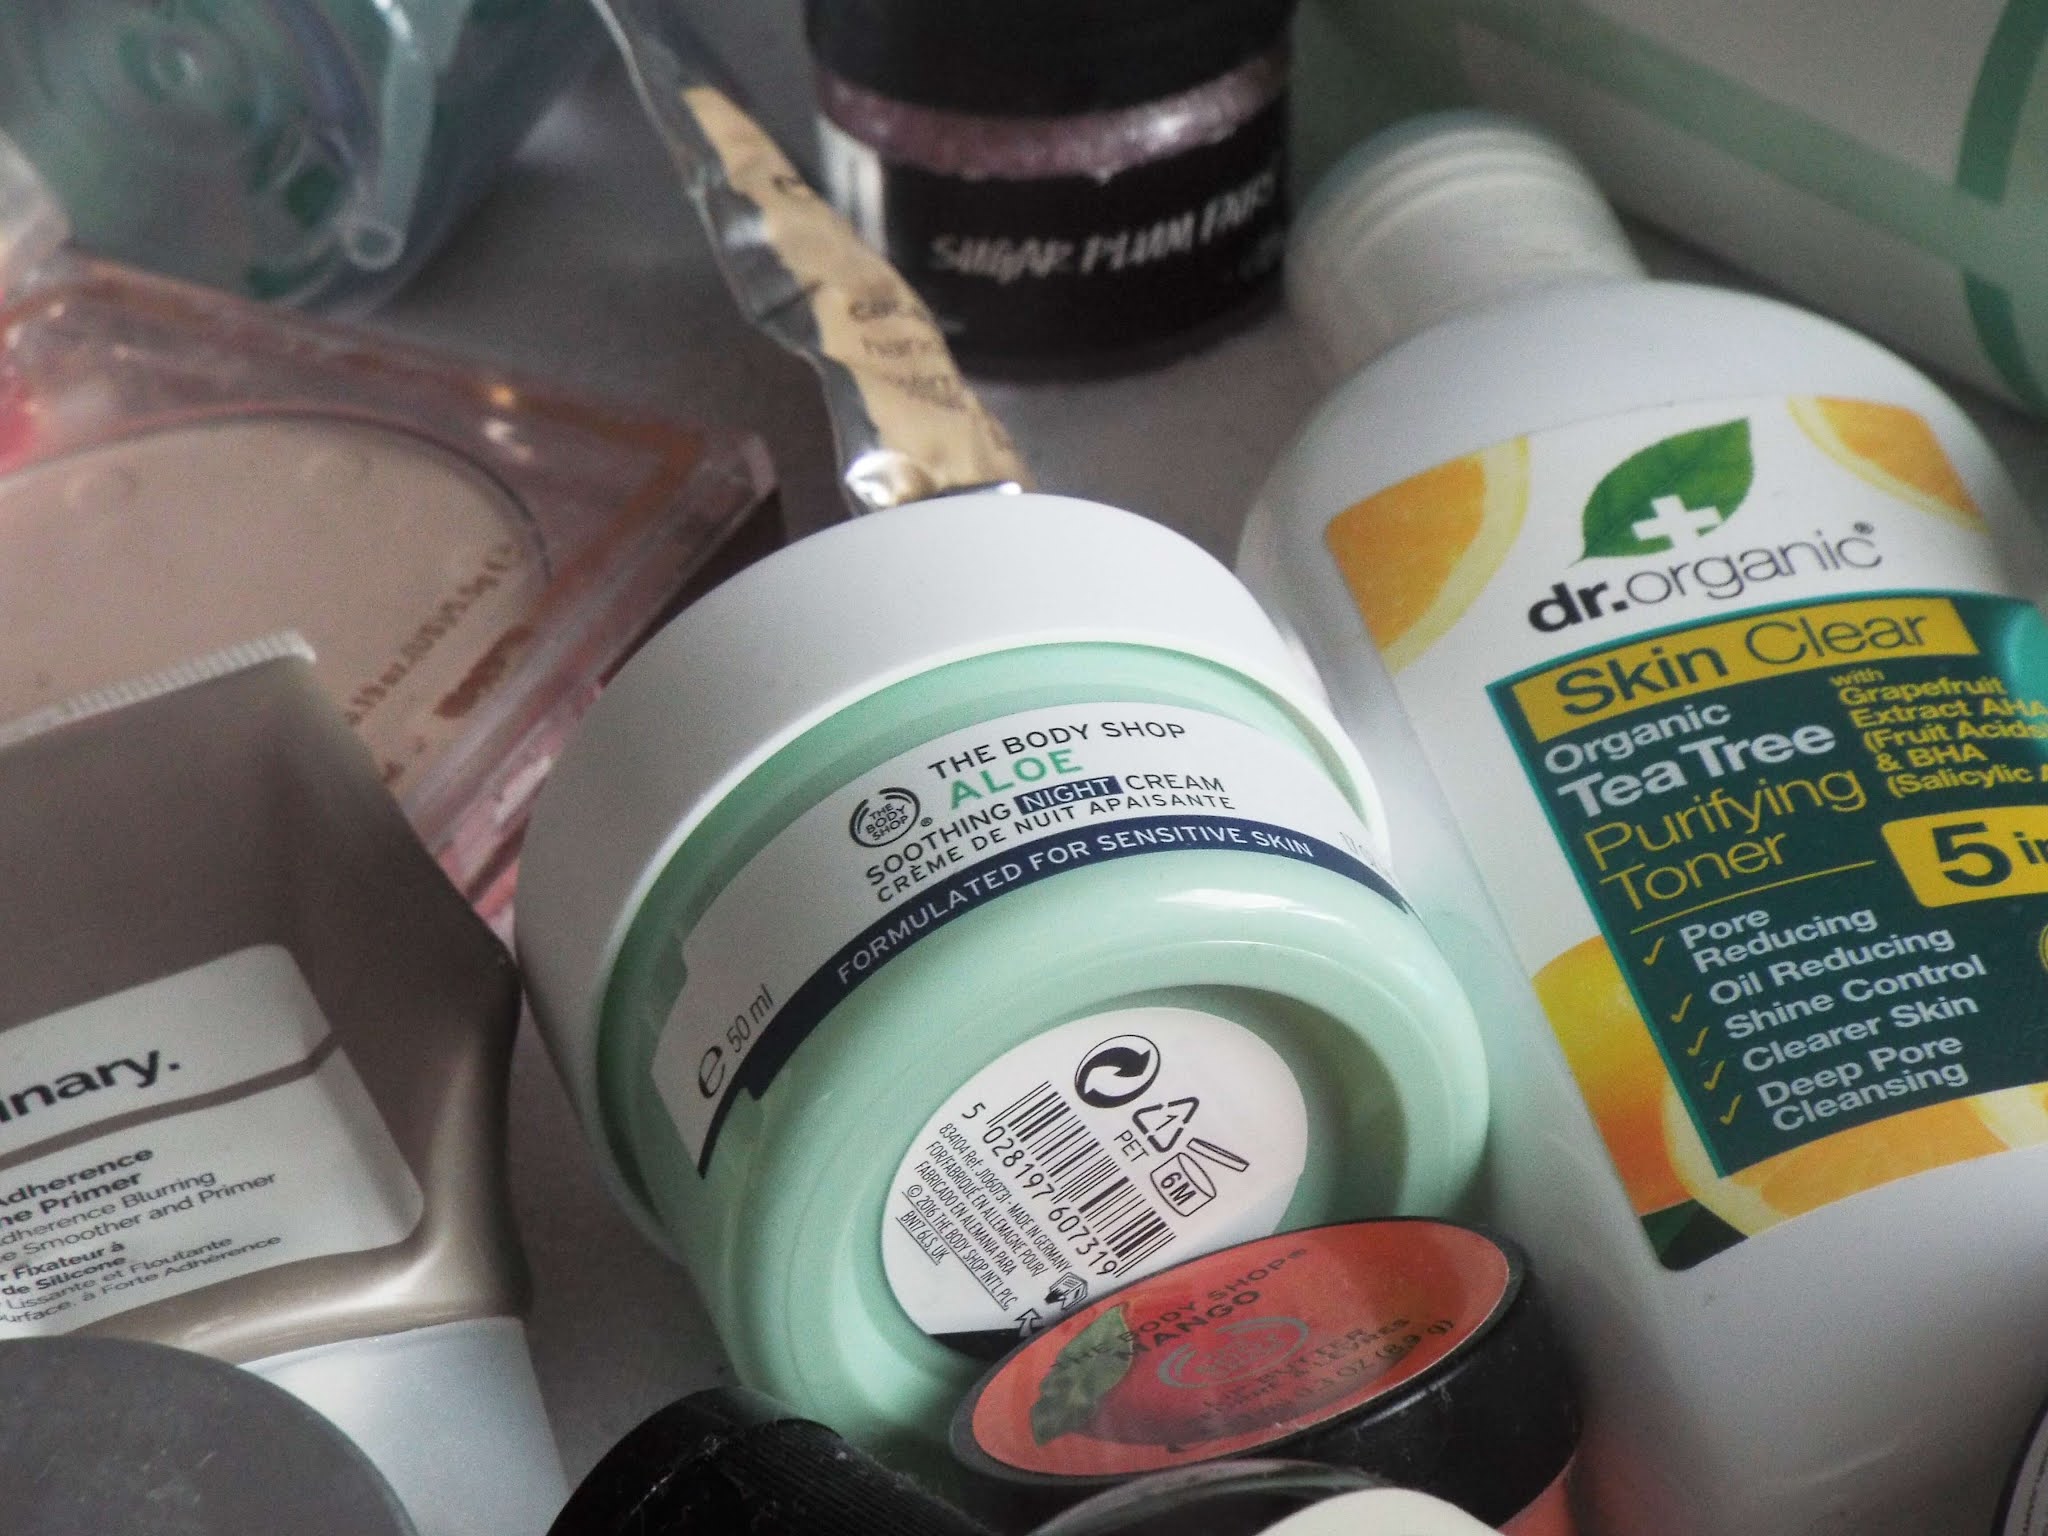 The Body Shop Aloe Soothing Night Cream, mingled amongst other productsin the flatlay, in pale green screw top pot.